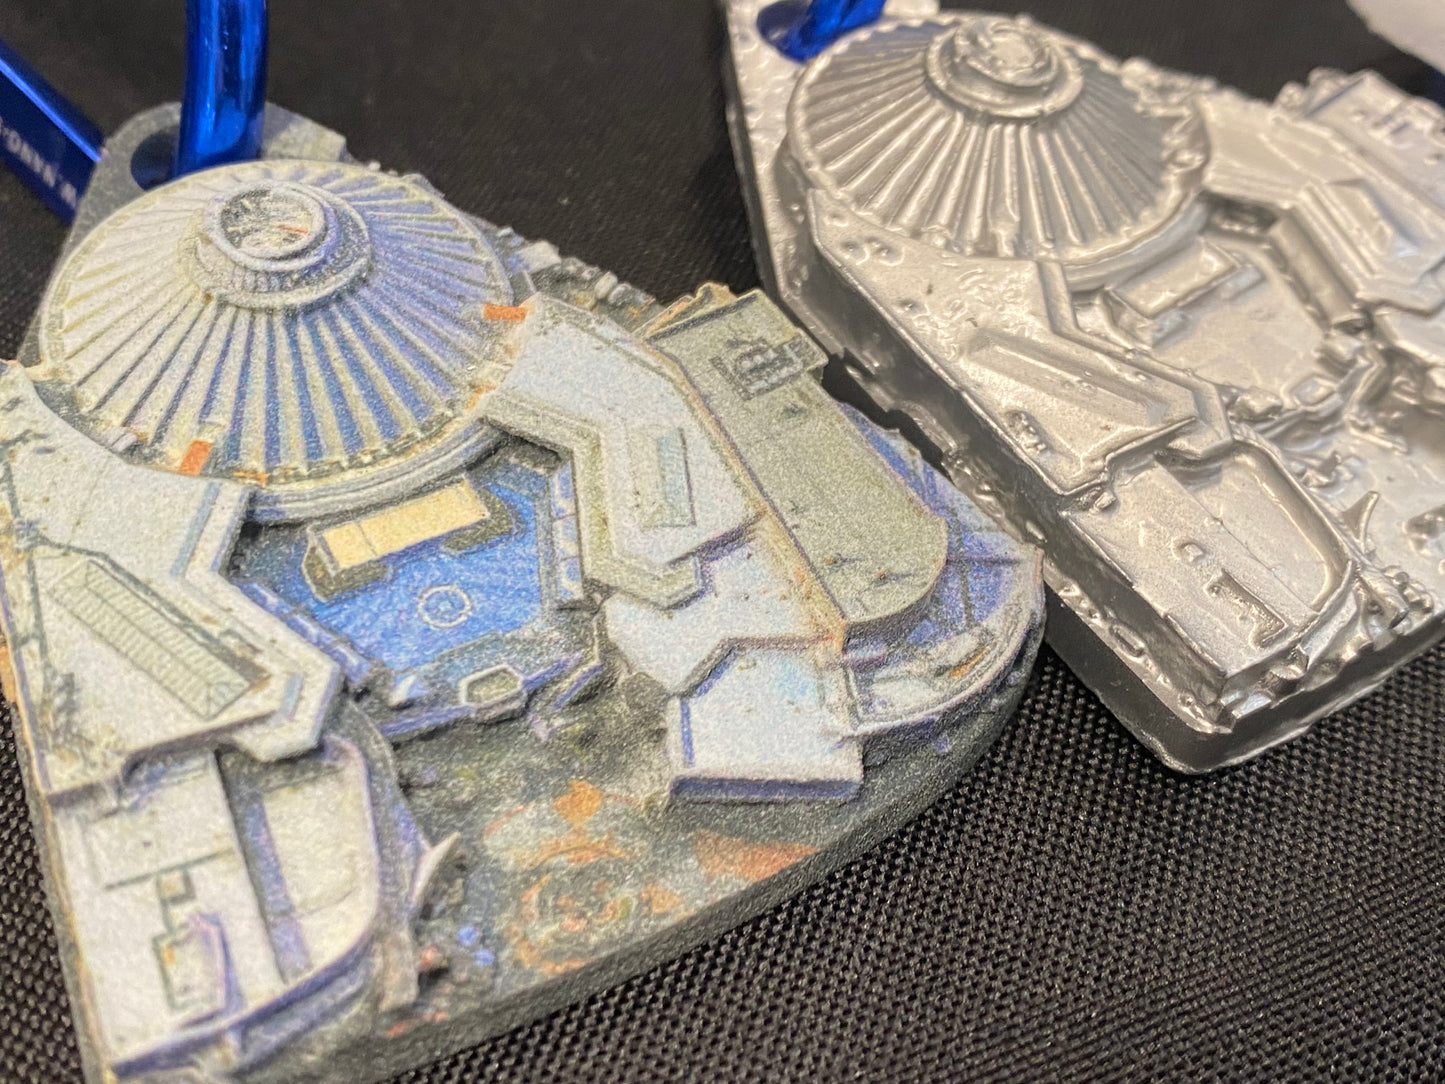 CHARMSCAPES  ORNAMENTS - Disneyland Space Mountain